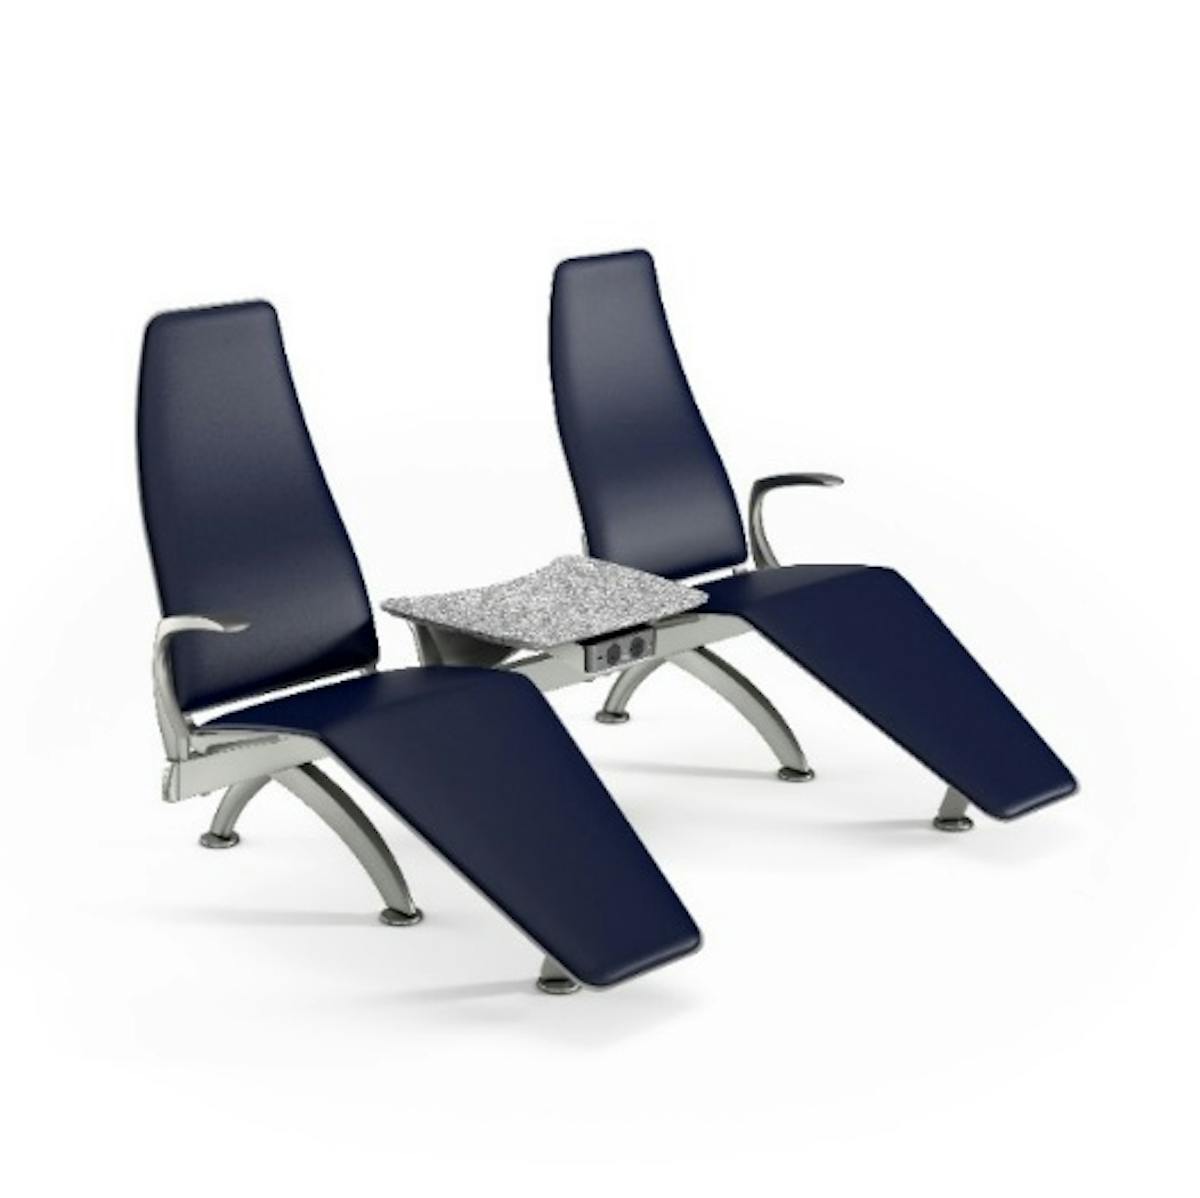 The Bern&ugrave; Aero Lounger is an addition to Arconas&rsquo; best-selling Bern&ugrave; Aero series beam mounted tandem seating line. The seat&rsquo;s contoured metal profile, high-back, footrest and plush padding provide exceptional comfort and durability for high-traffic waiting areas, allowing passengers to lounge and relax.